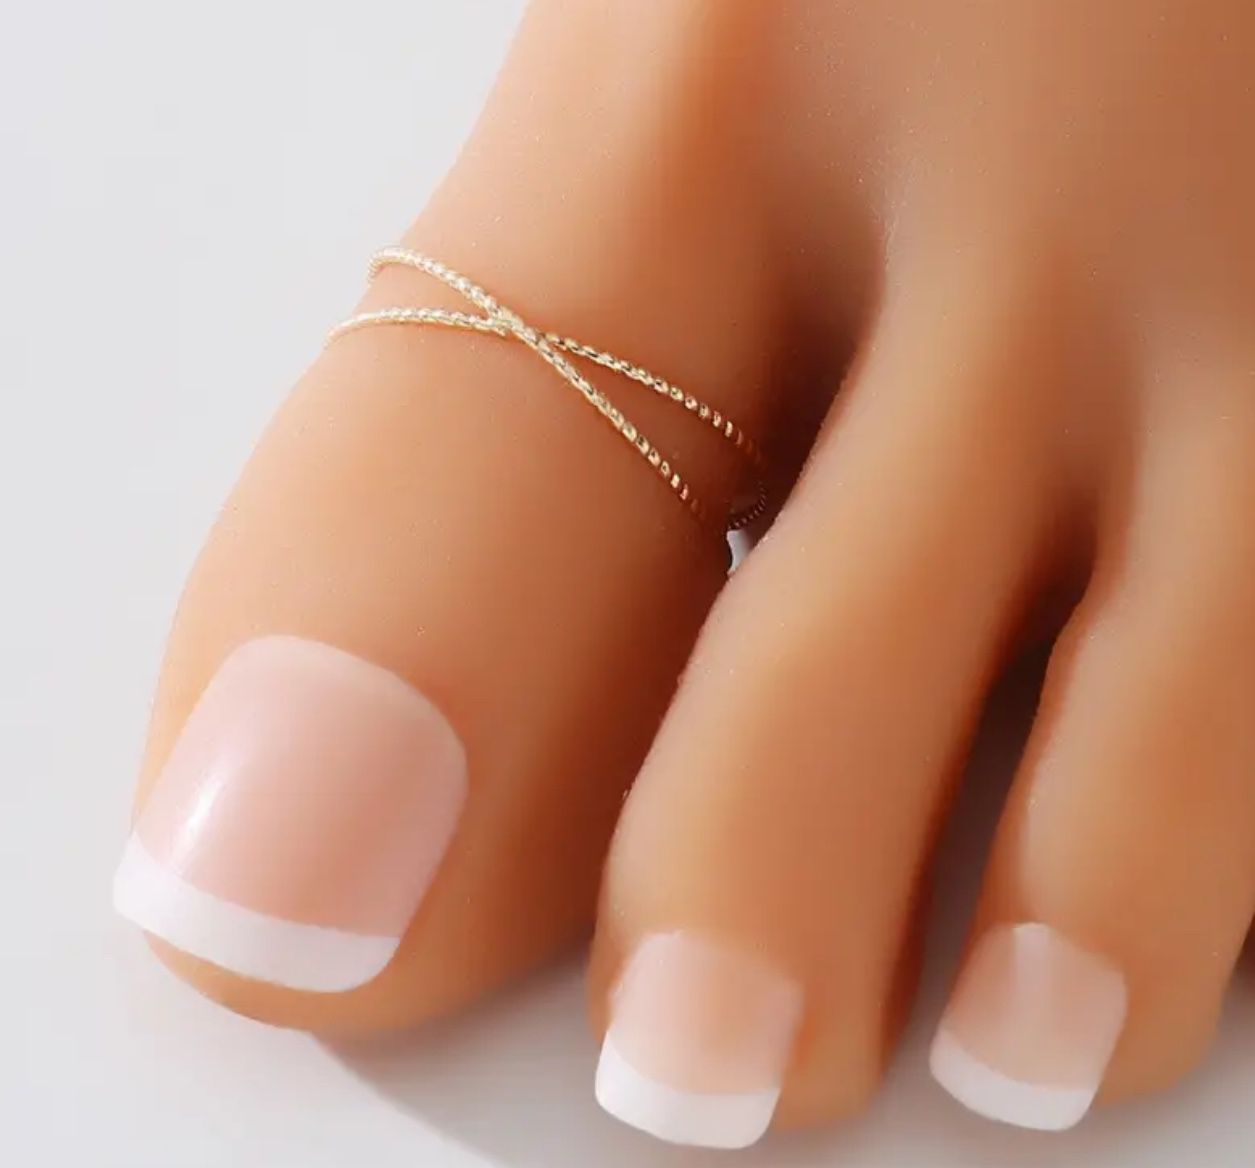 14 Carat Gold Plated Cross Toe Ring